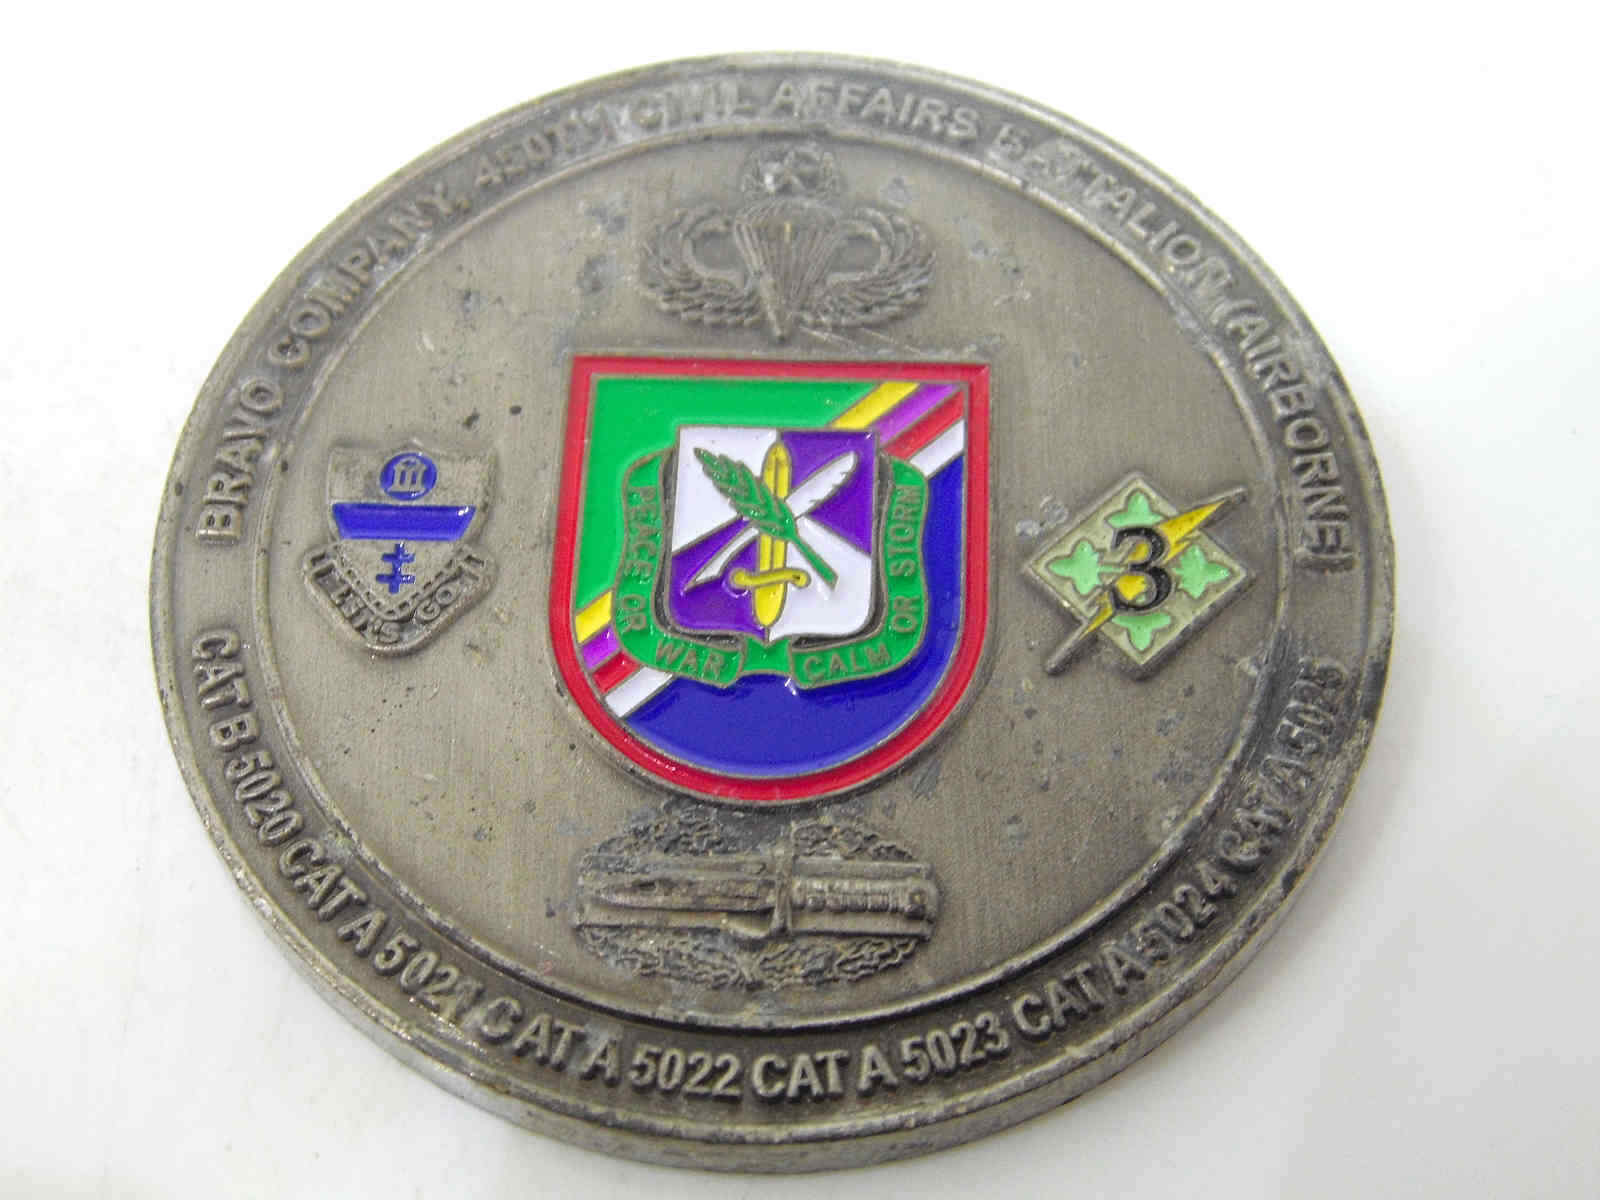 OIF 07-08 CHALLENGE COIN